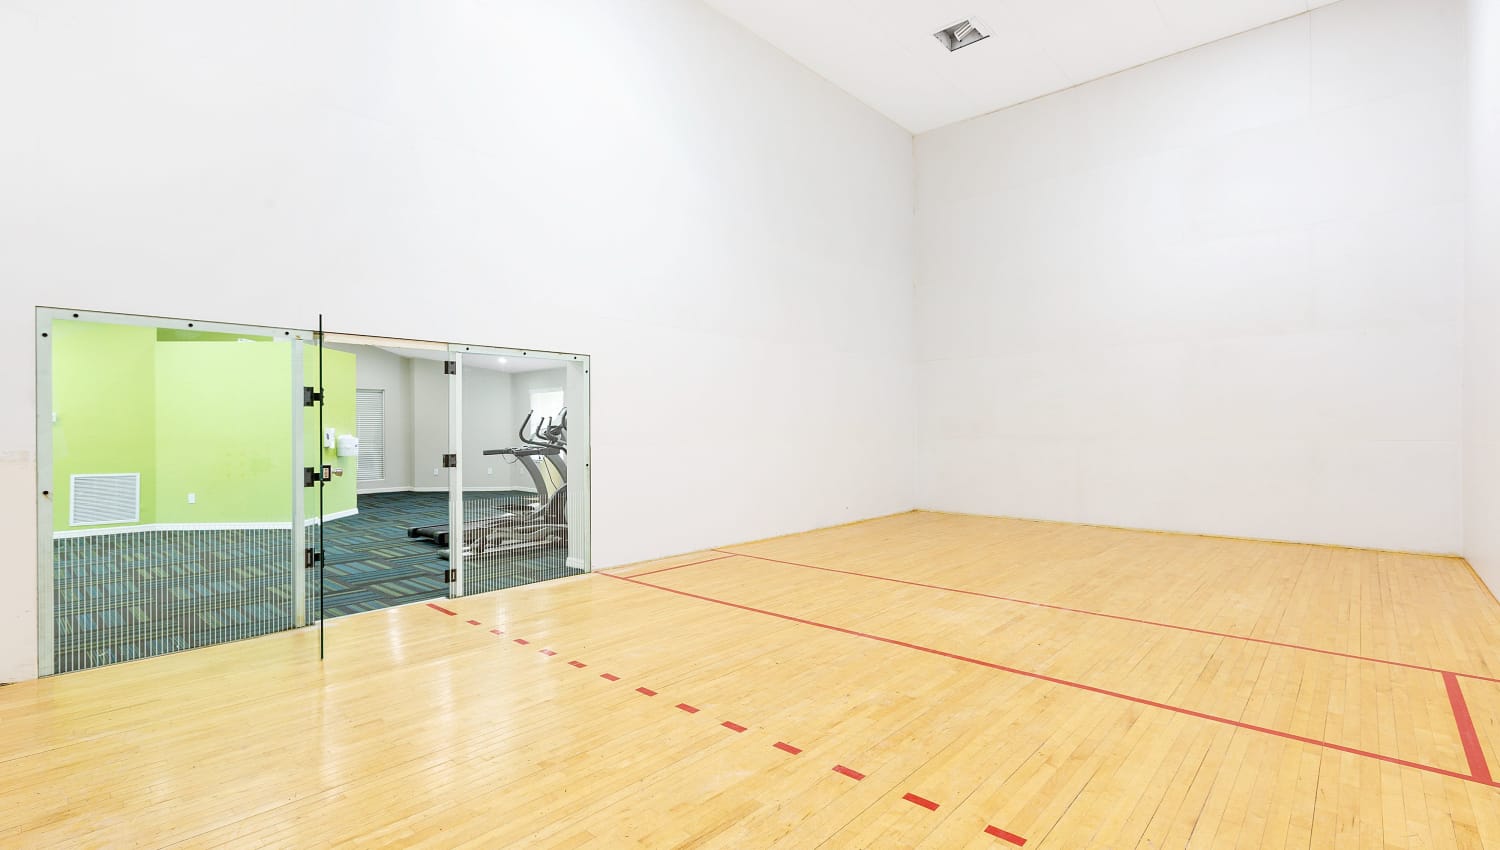 Racquetball court at Mosaic Apartments in Coral Springs, Florida